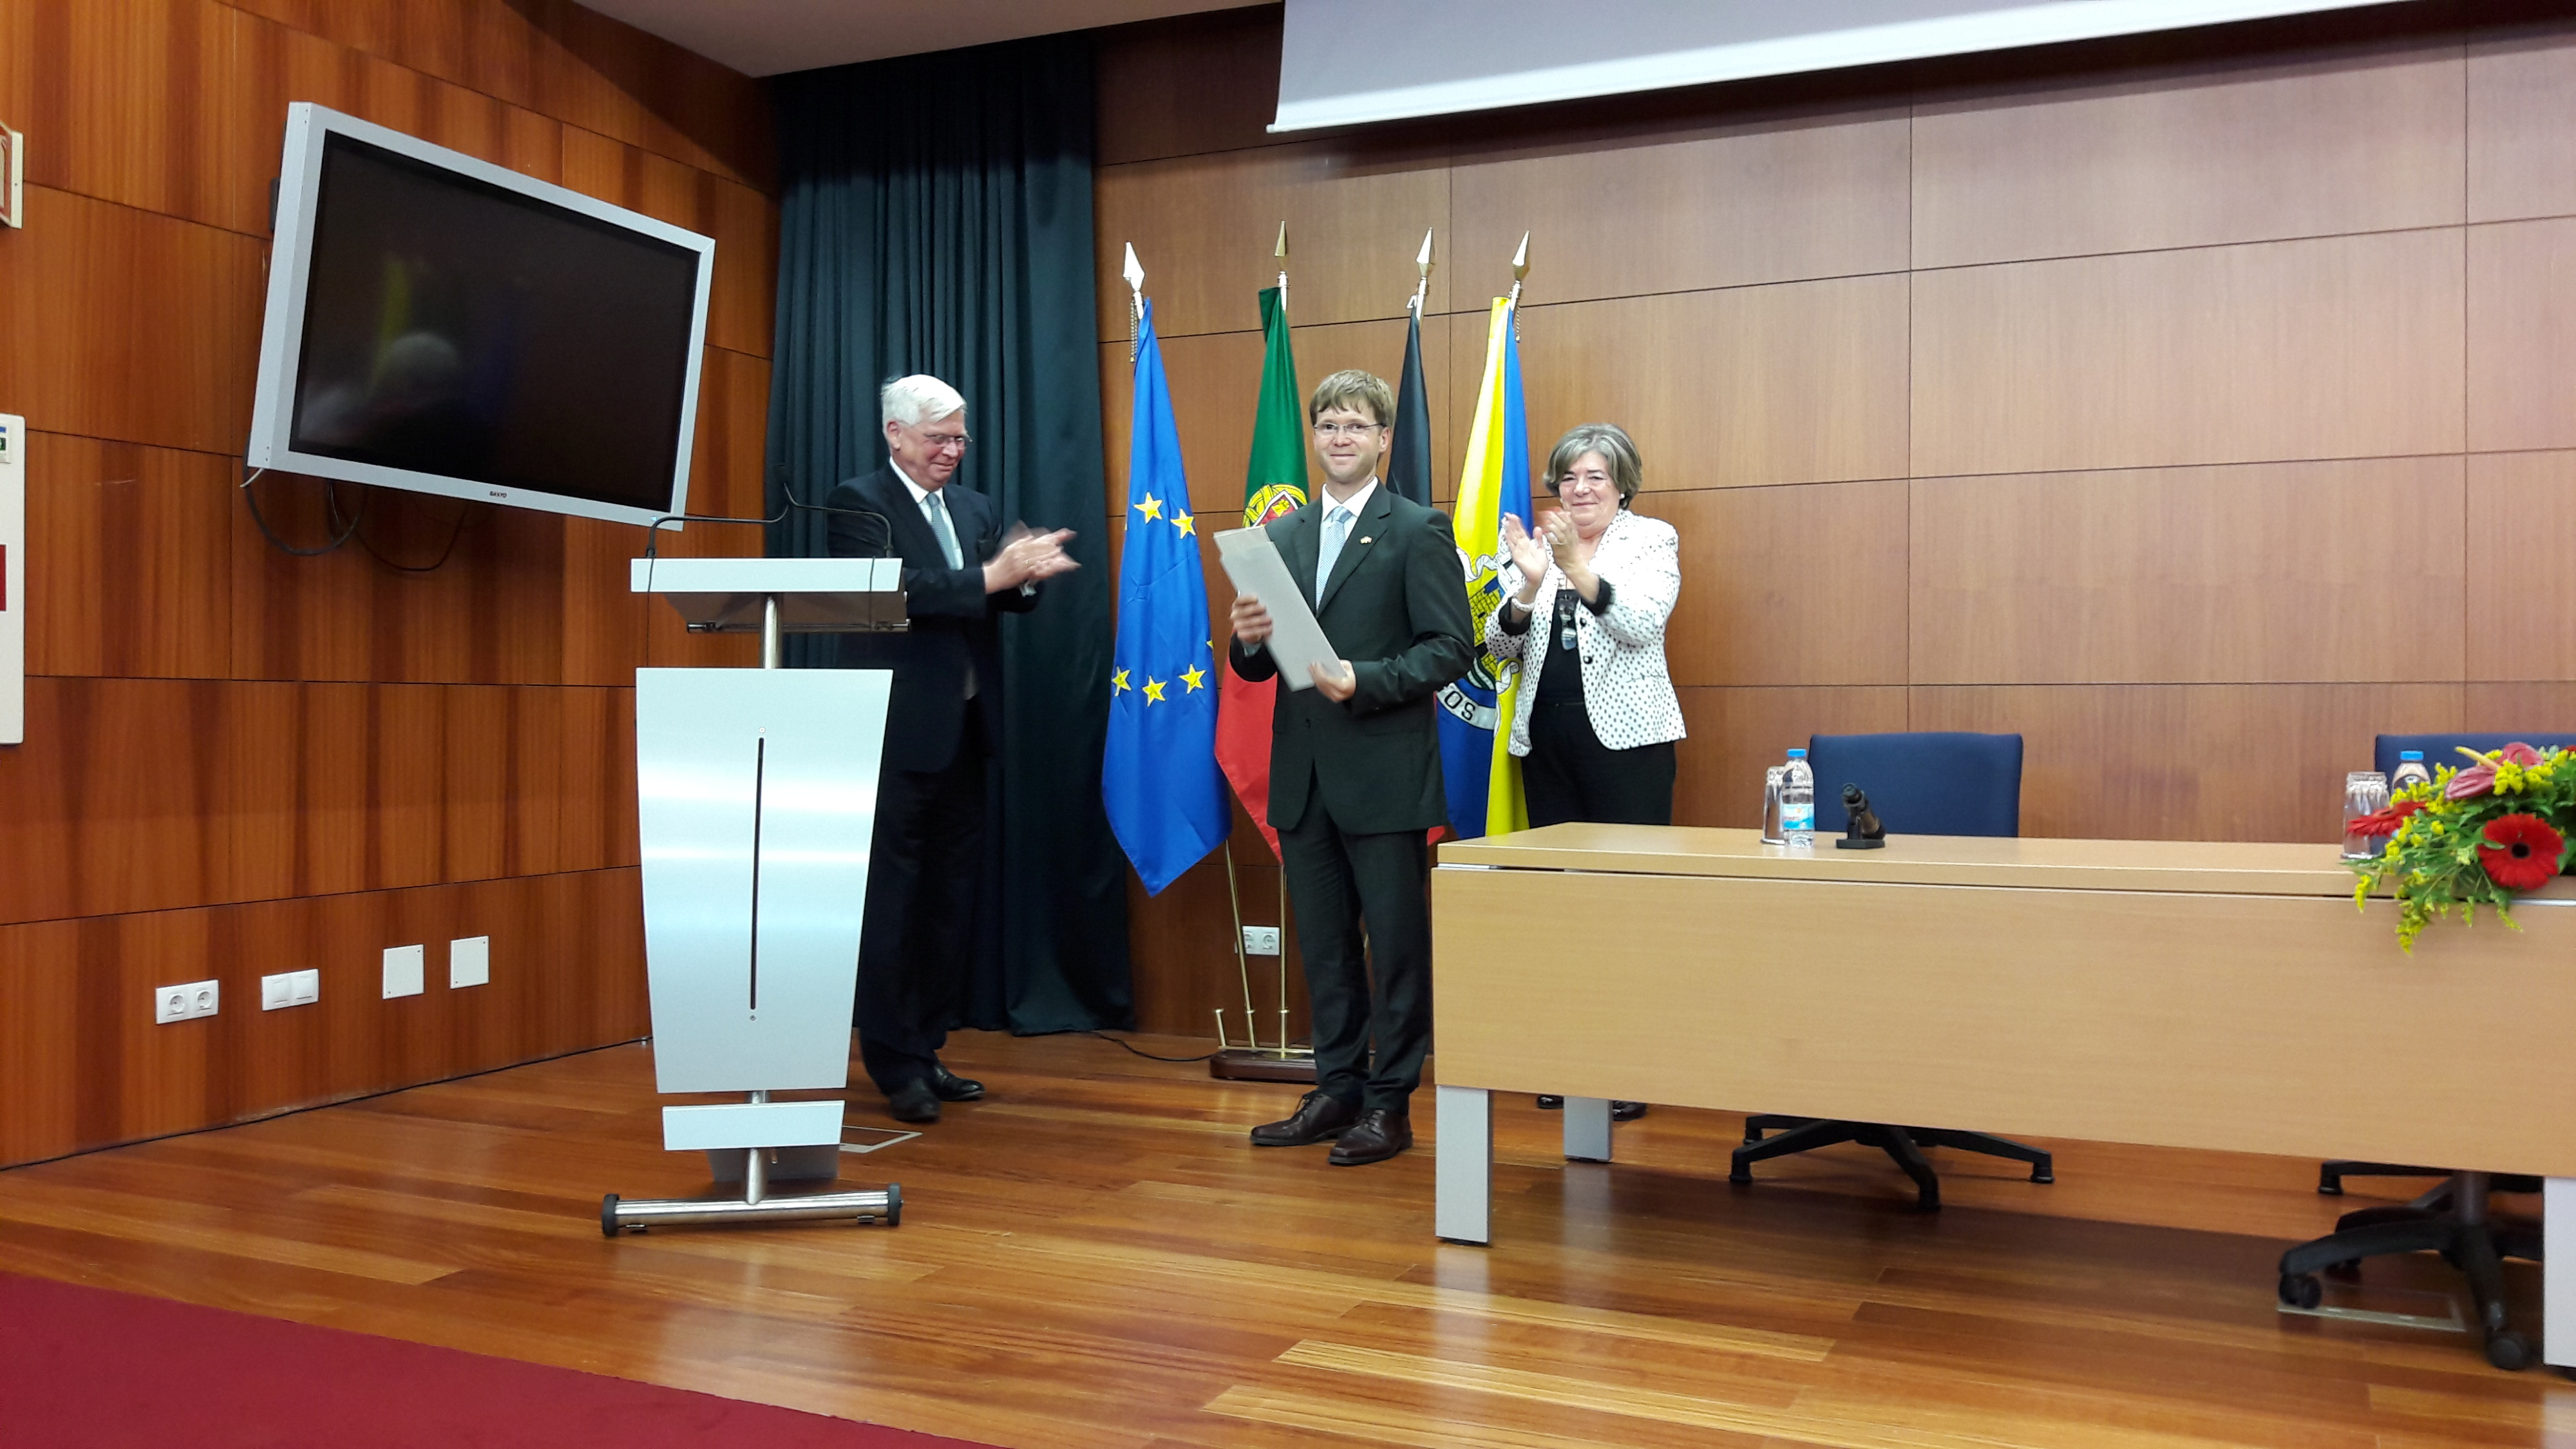 Dr. Alexander Rathenau is the new Honorary Consul in the Algarve